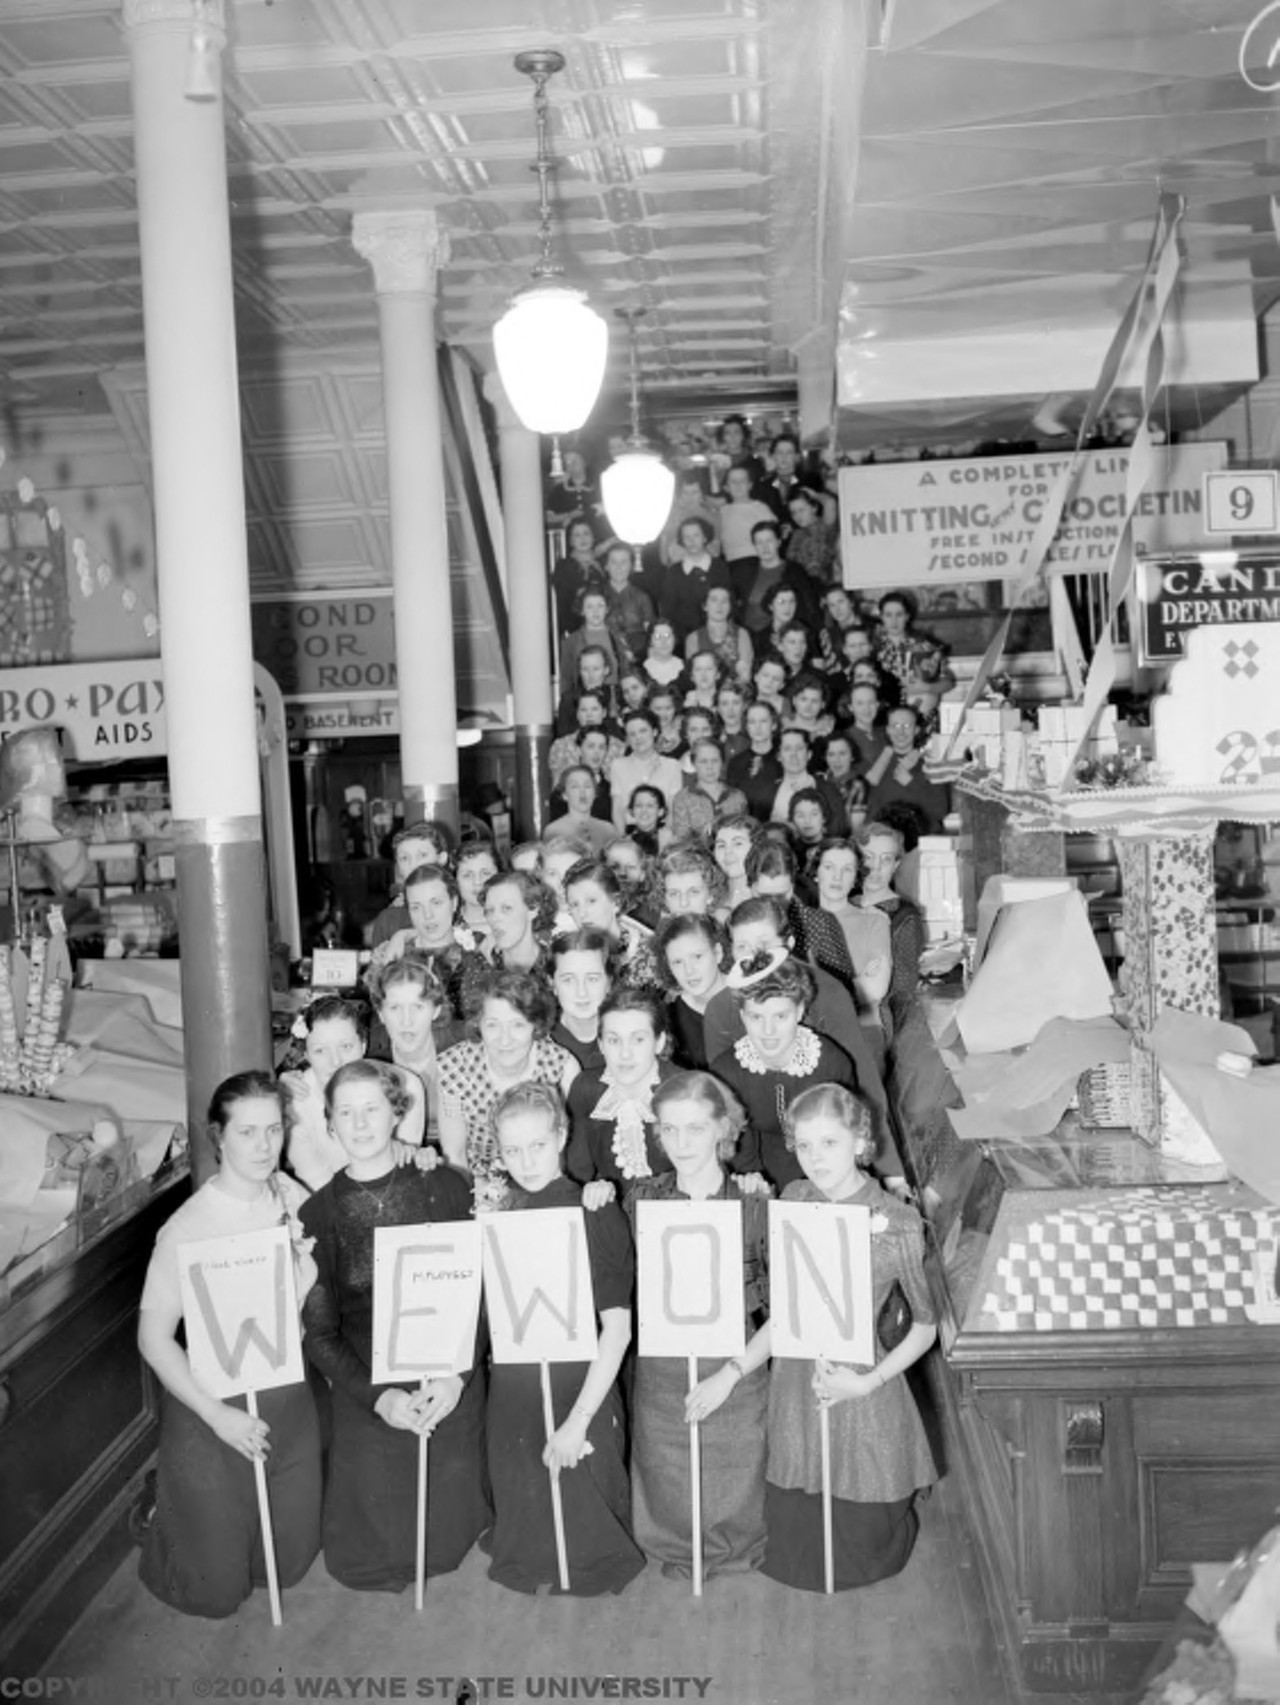 1930s | Large group of female employees pose for camera with signs that read, "We won," at conclusion of sit-down strike at Woolworth Company in Detroit, Michigan.